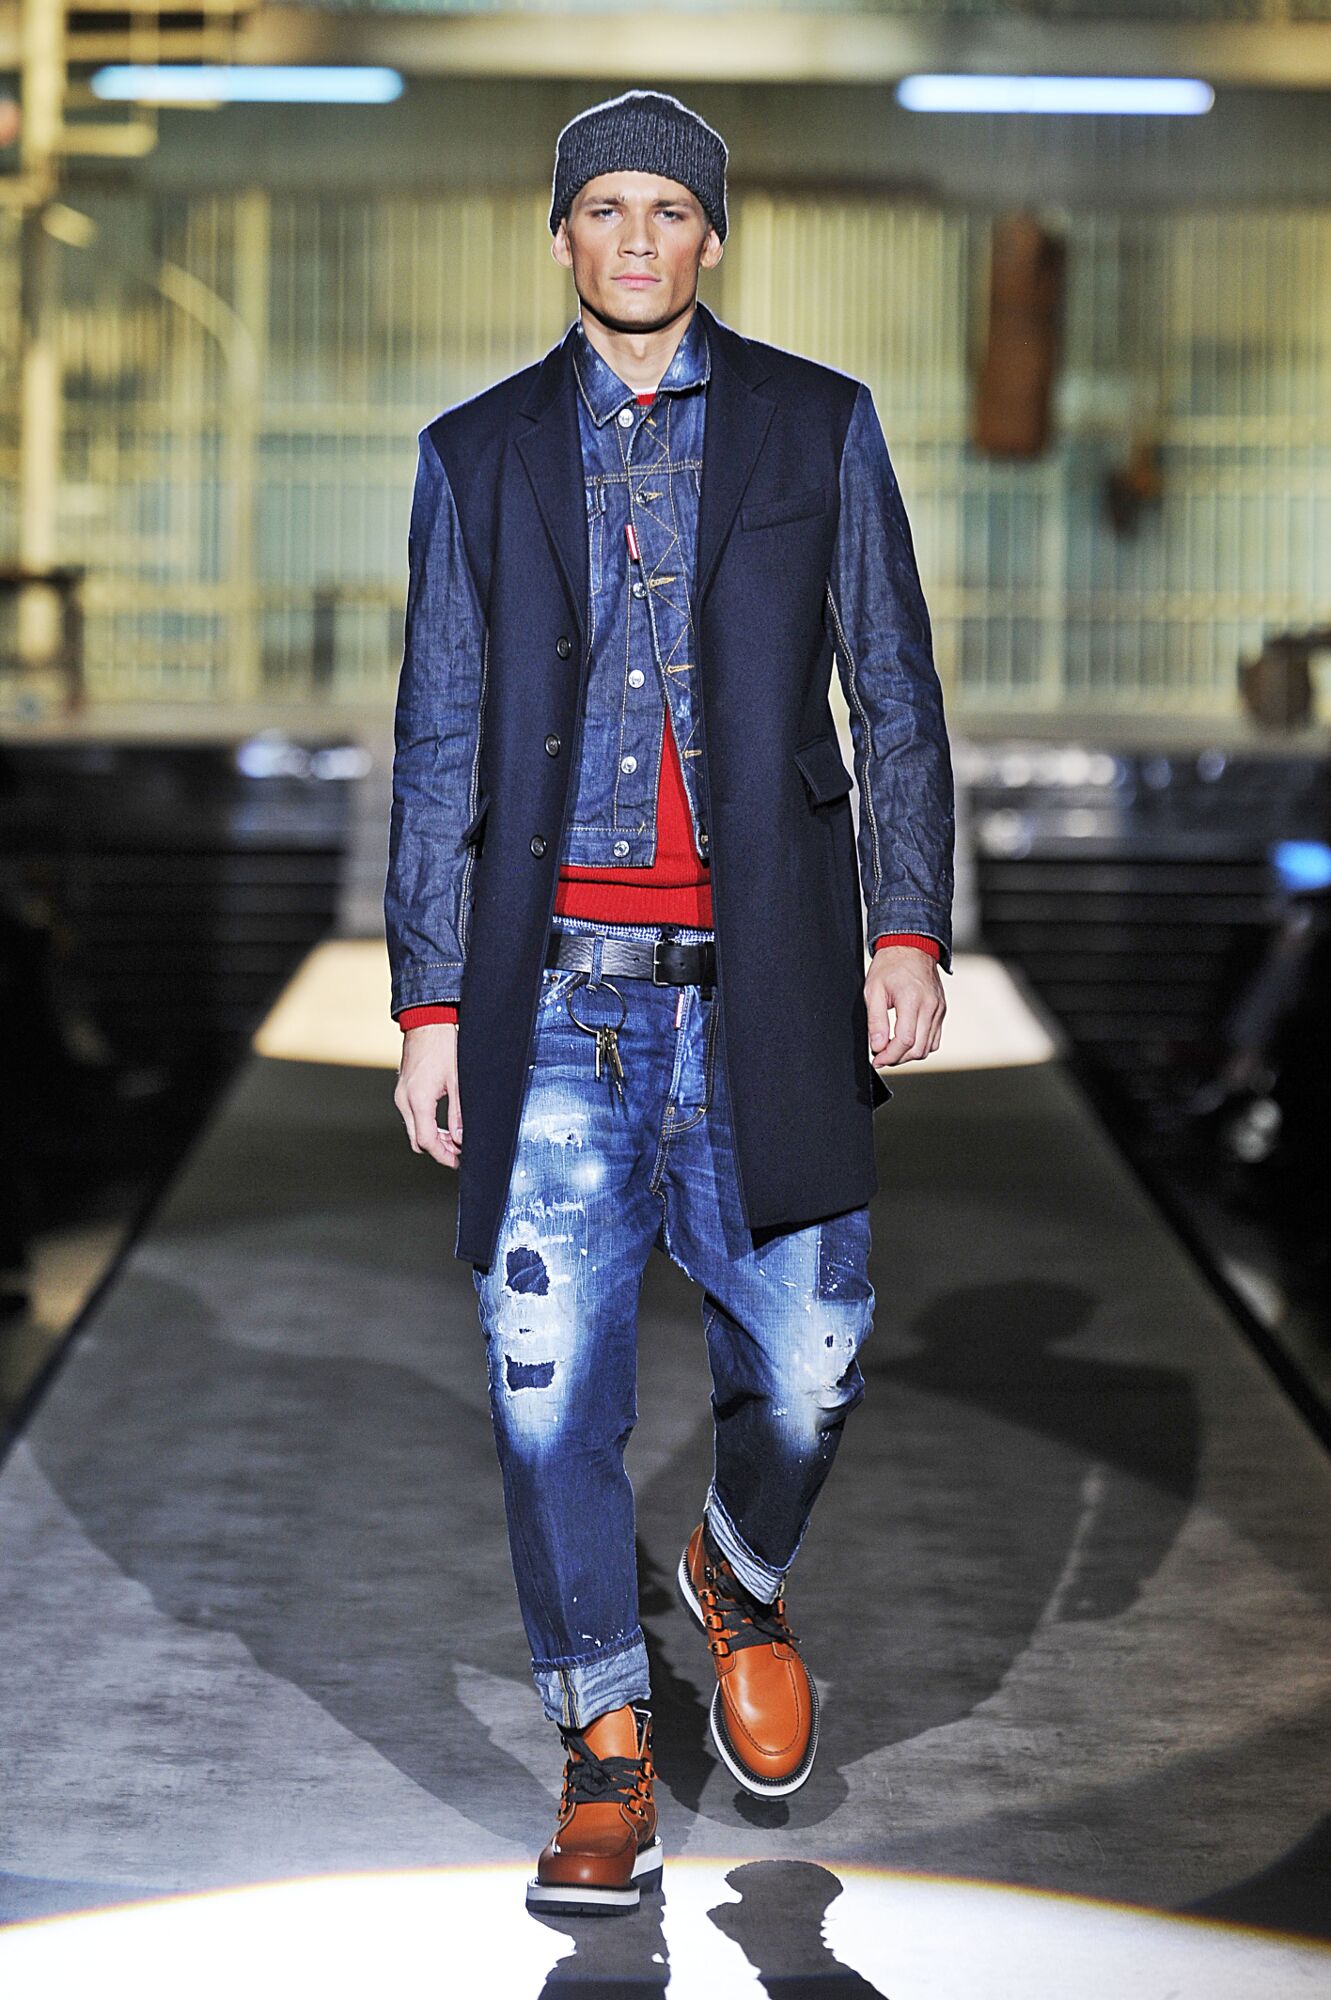 DSQUARED2 FALL WINTER 2014 MEN’S COLLECTION | The Skinny Beep